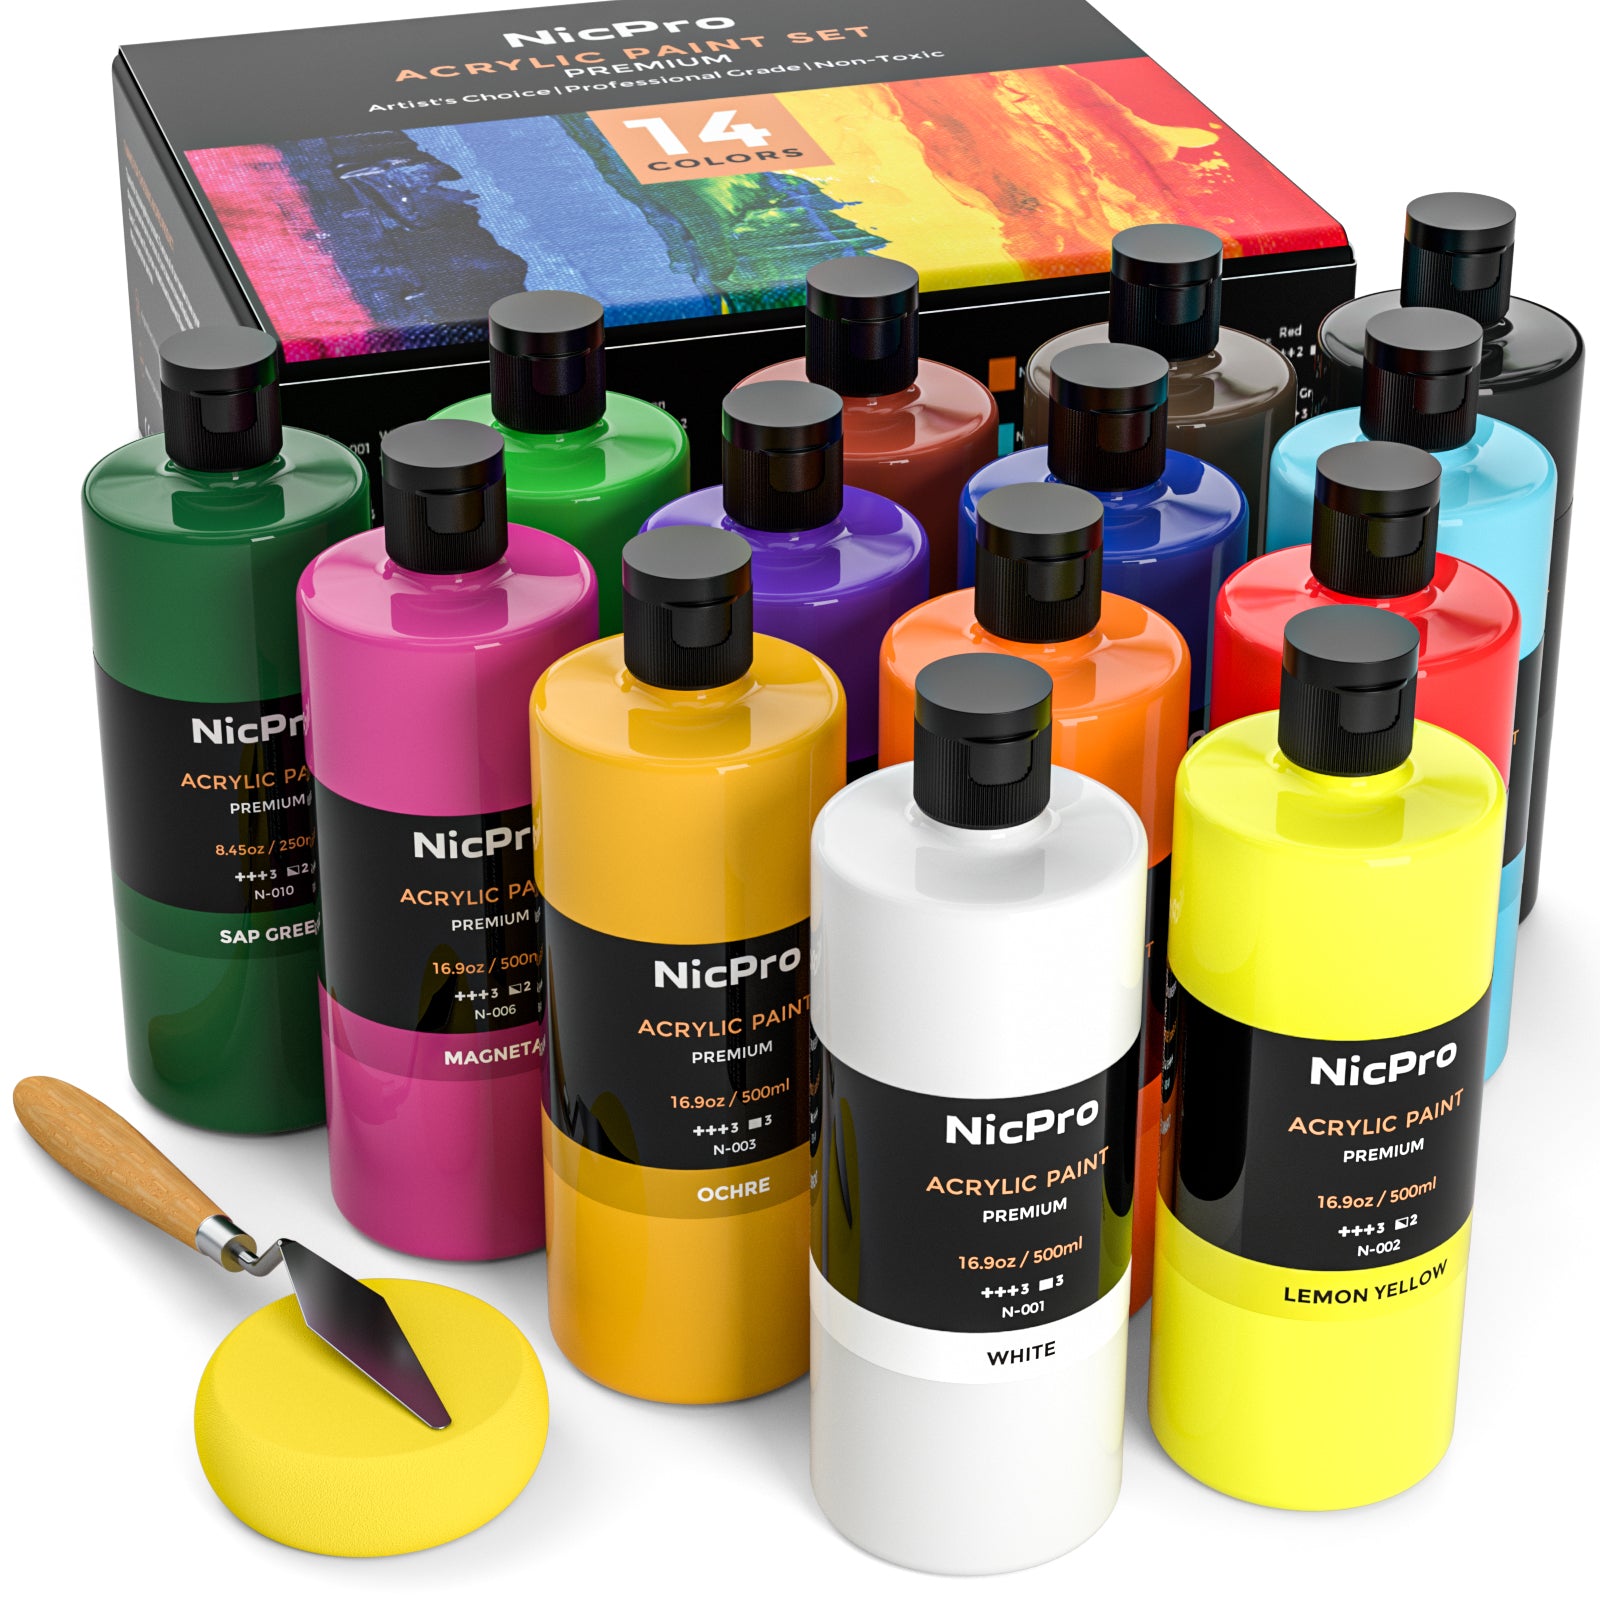 Nicpro 14 Colors Large Bulk Acrylic Paint Set (16.9 oz,500 ml) Rich Acrylic Painting Supplies for Artist, Adults & Kids, Ideal for Multi Surface Craft Art on Canvas Wood Leather Fabric Stone Non Toxic